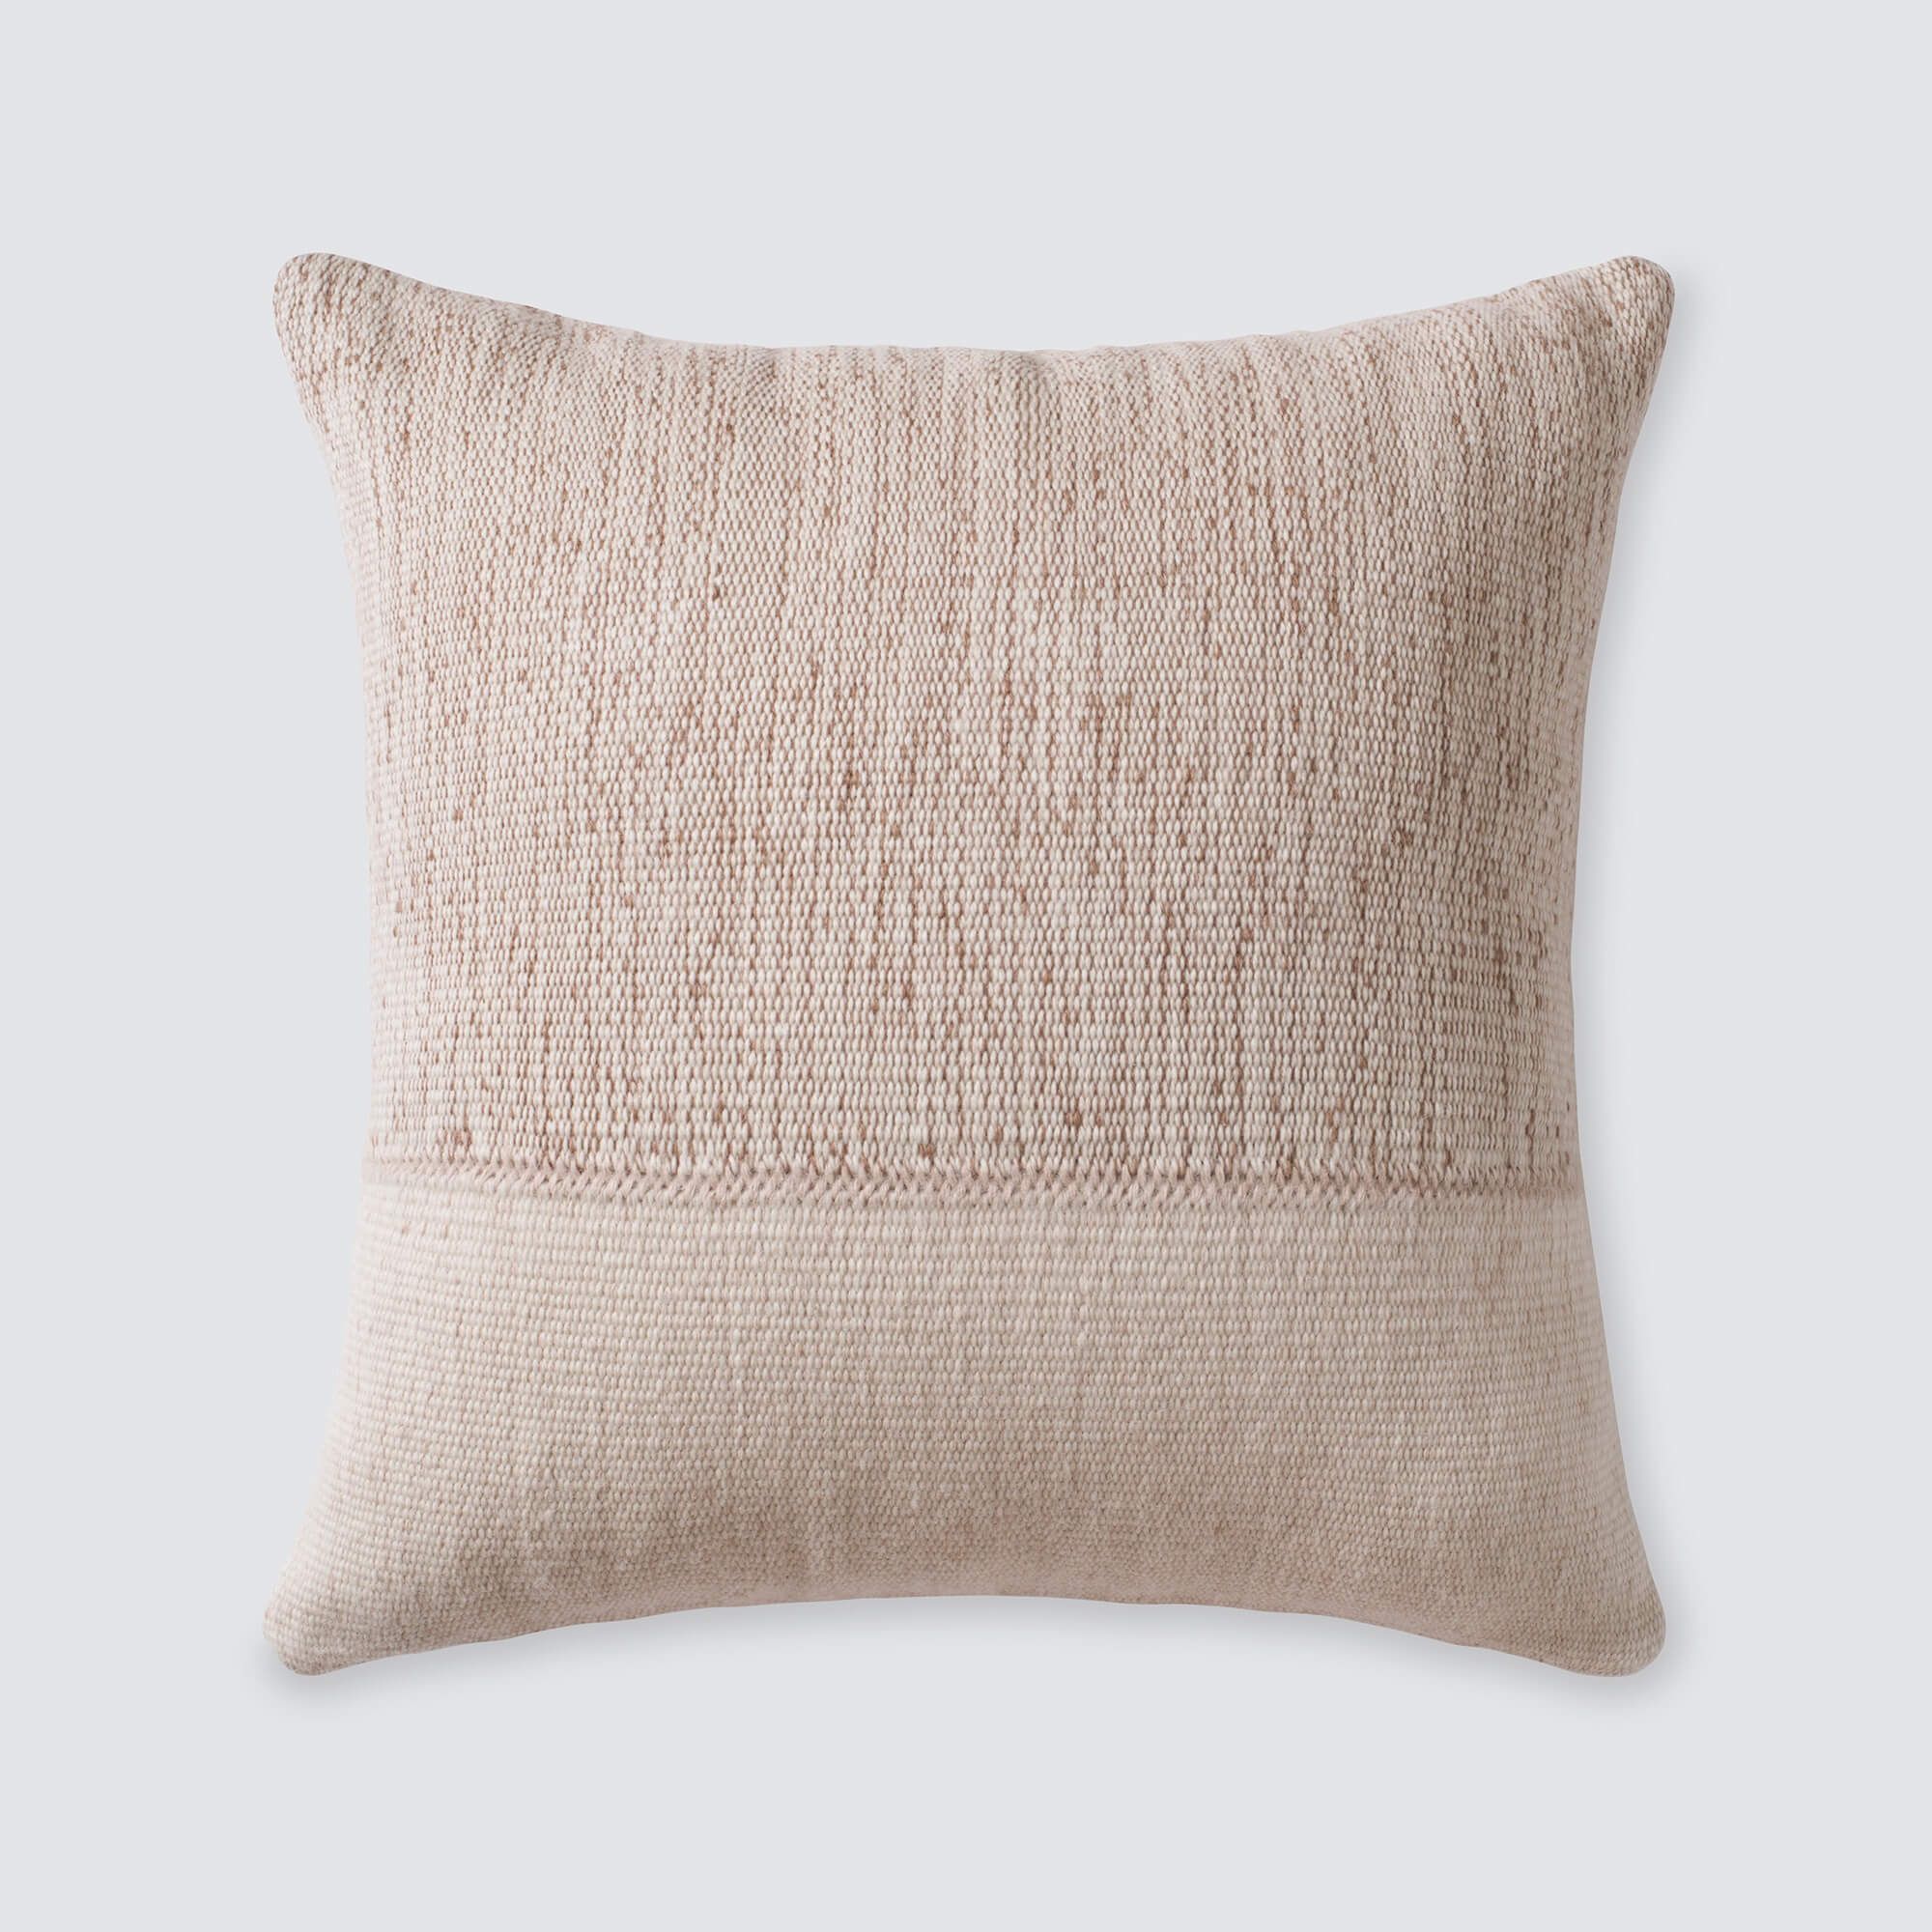 Claro Pillow | The Citizenry